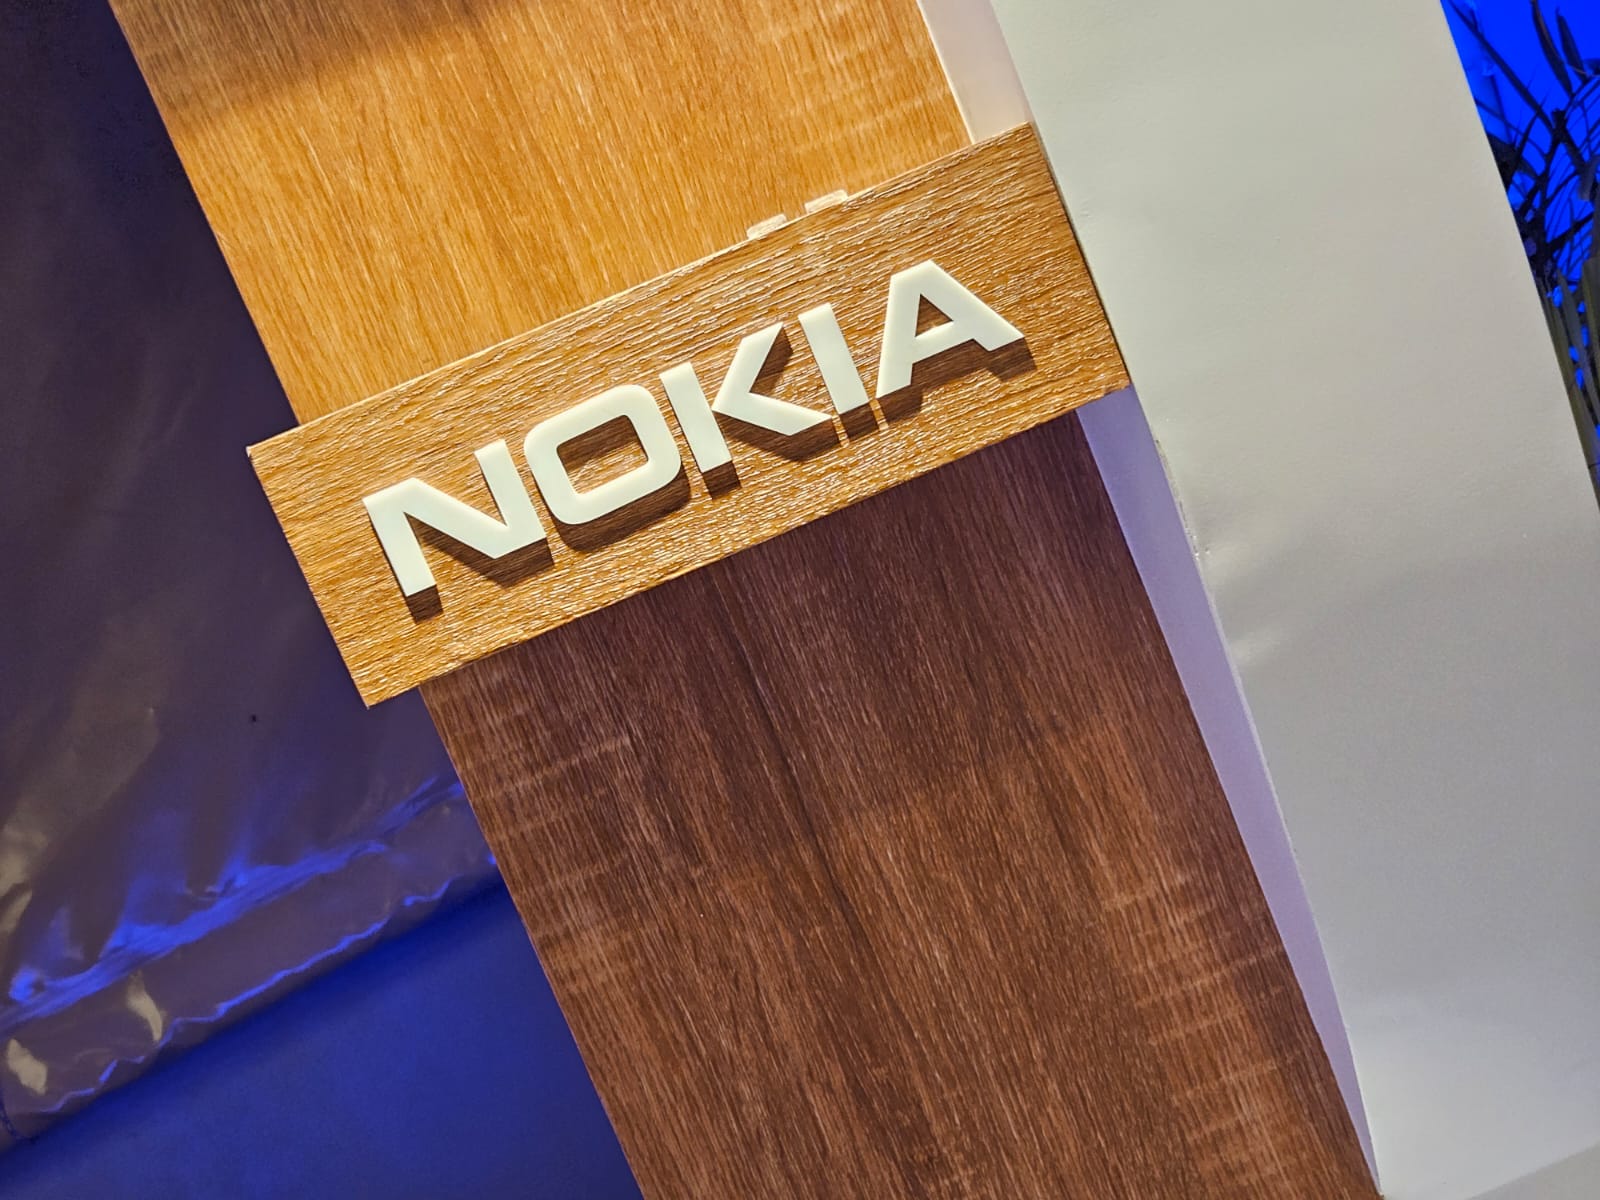 HMD outlines sustainability efforts for the Nokia brand in latest CSR report